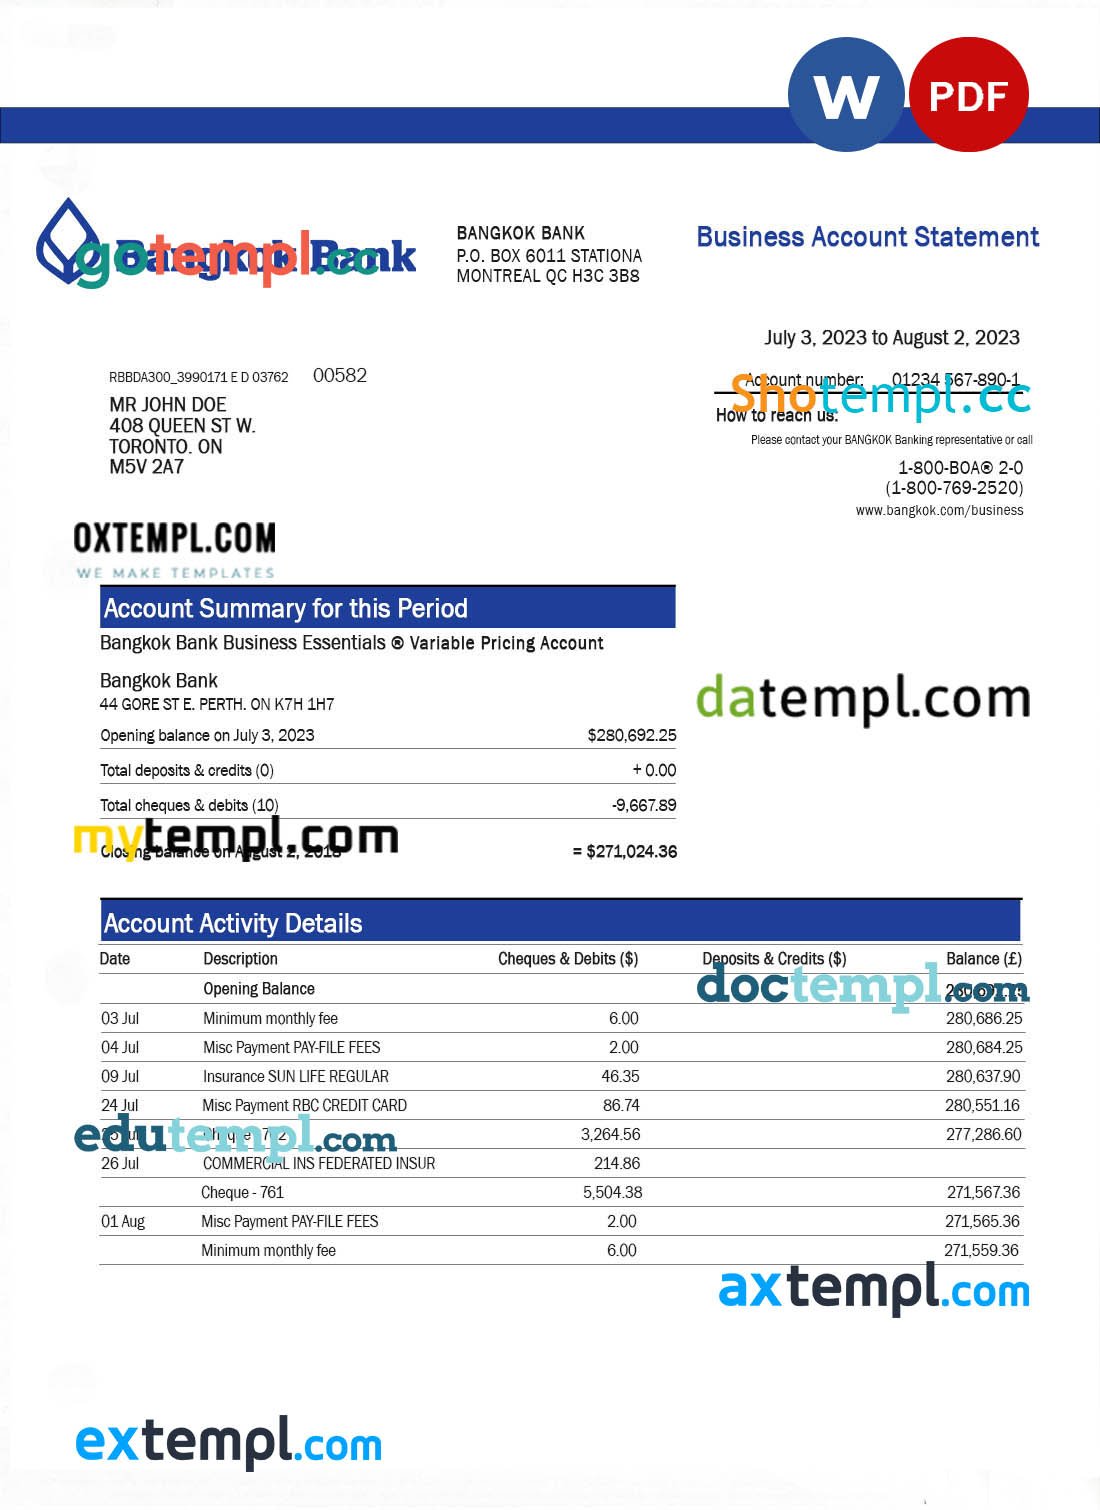 Professional Advertising Agency Invoice template in word and pdf format